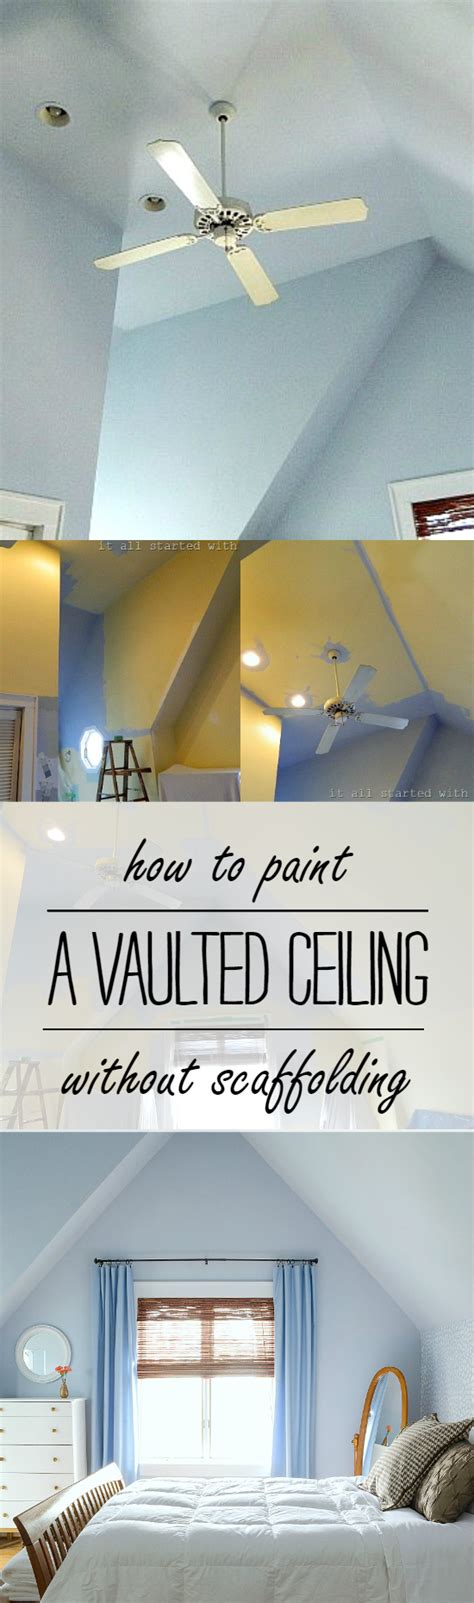 Although painting a vaulted ceiling isn't easy, it's usually possible without putting up scaffolding. How To Paint A Vaulted Ceiling Without Scaffolding